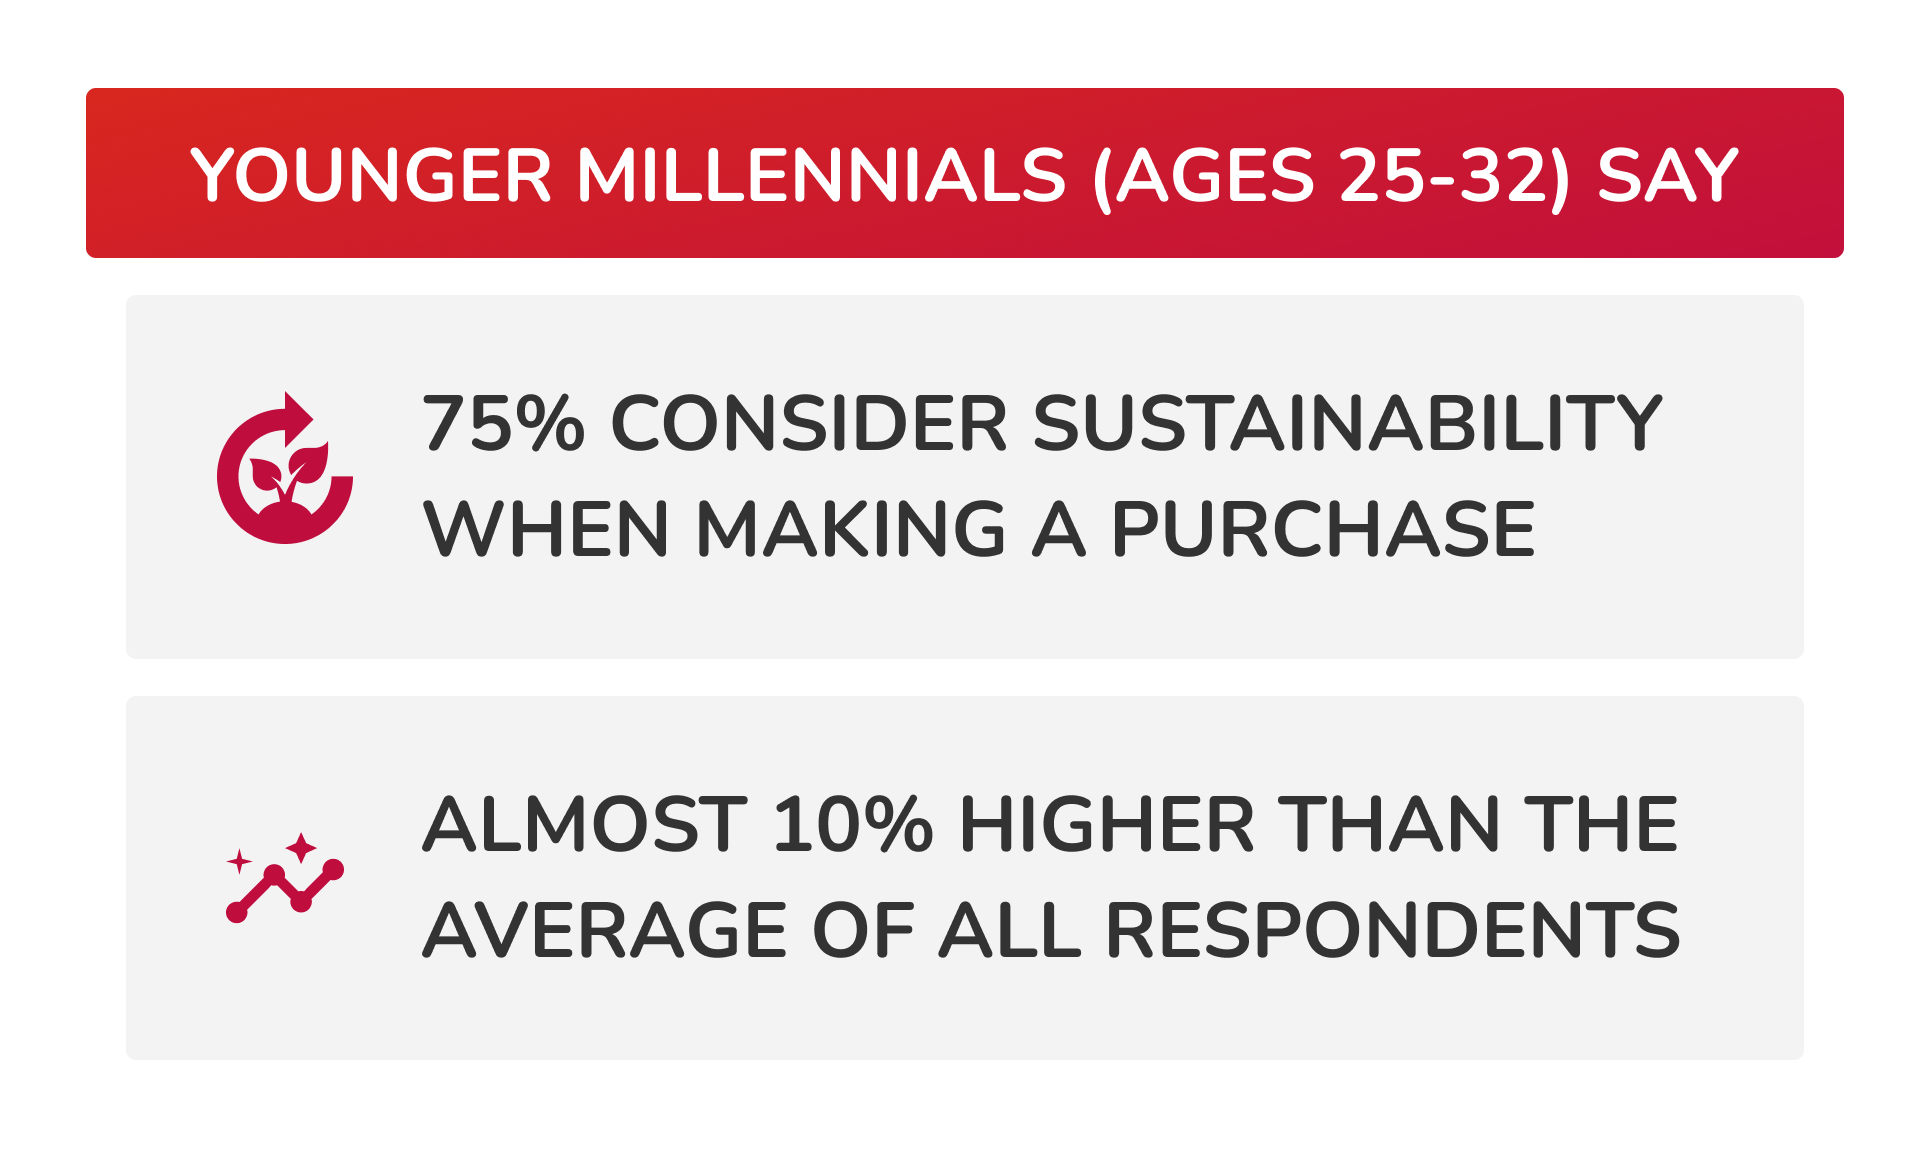 Younger Millennials (ages 25-32) say: 75% consider sustainability when making a purchase; Almost 10% higher than the average of all respondents